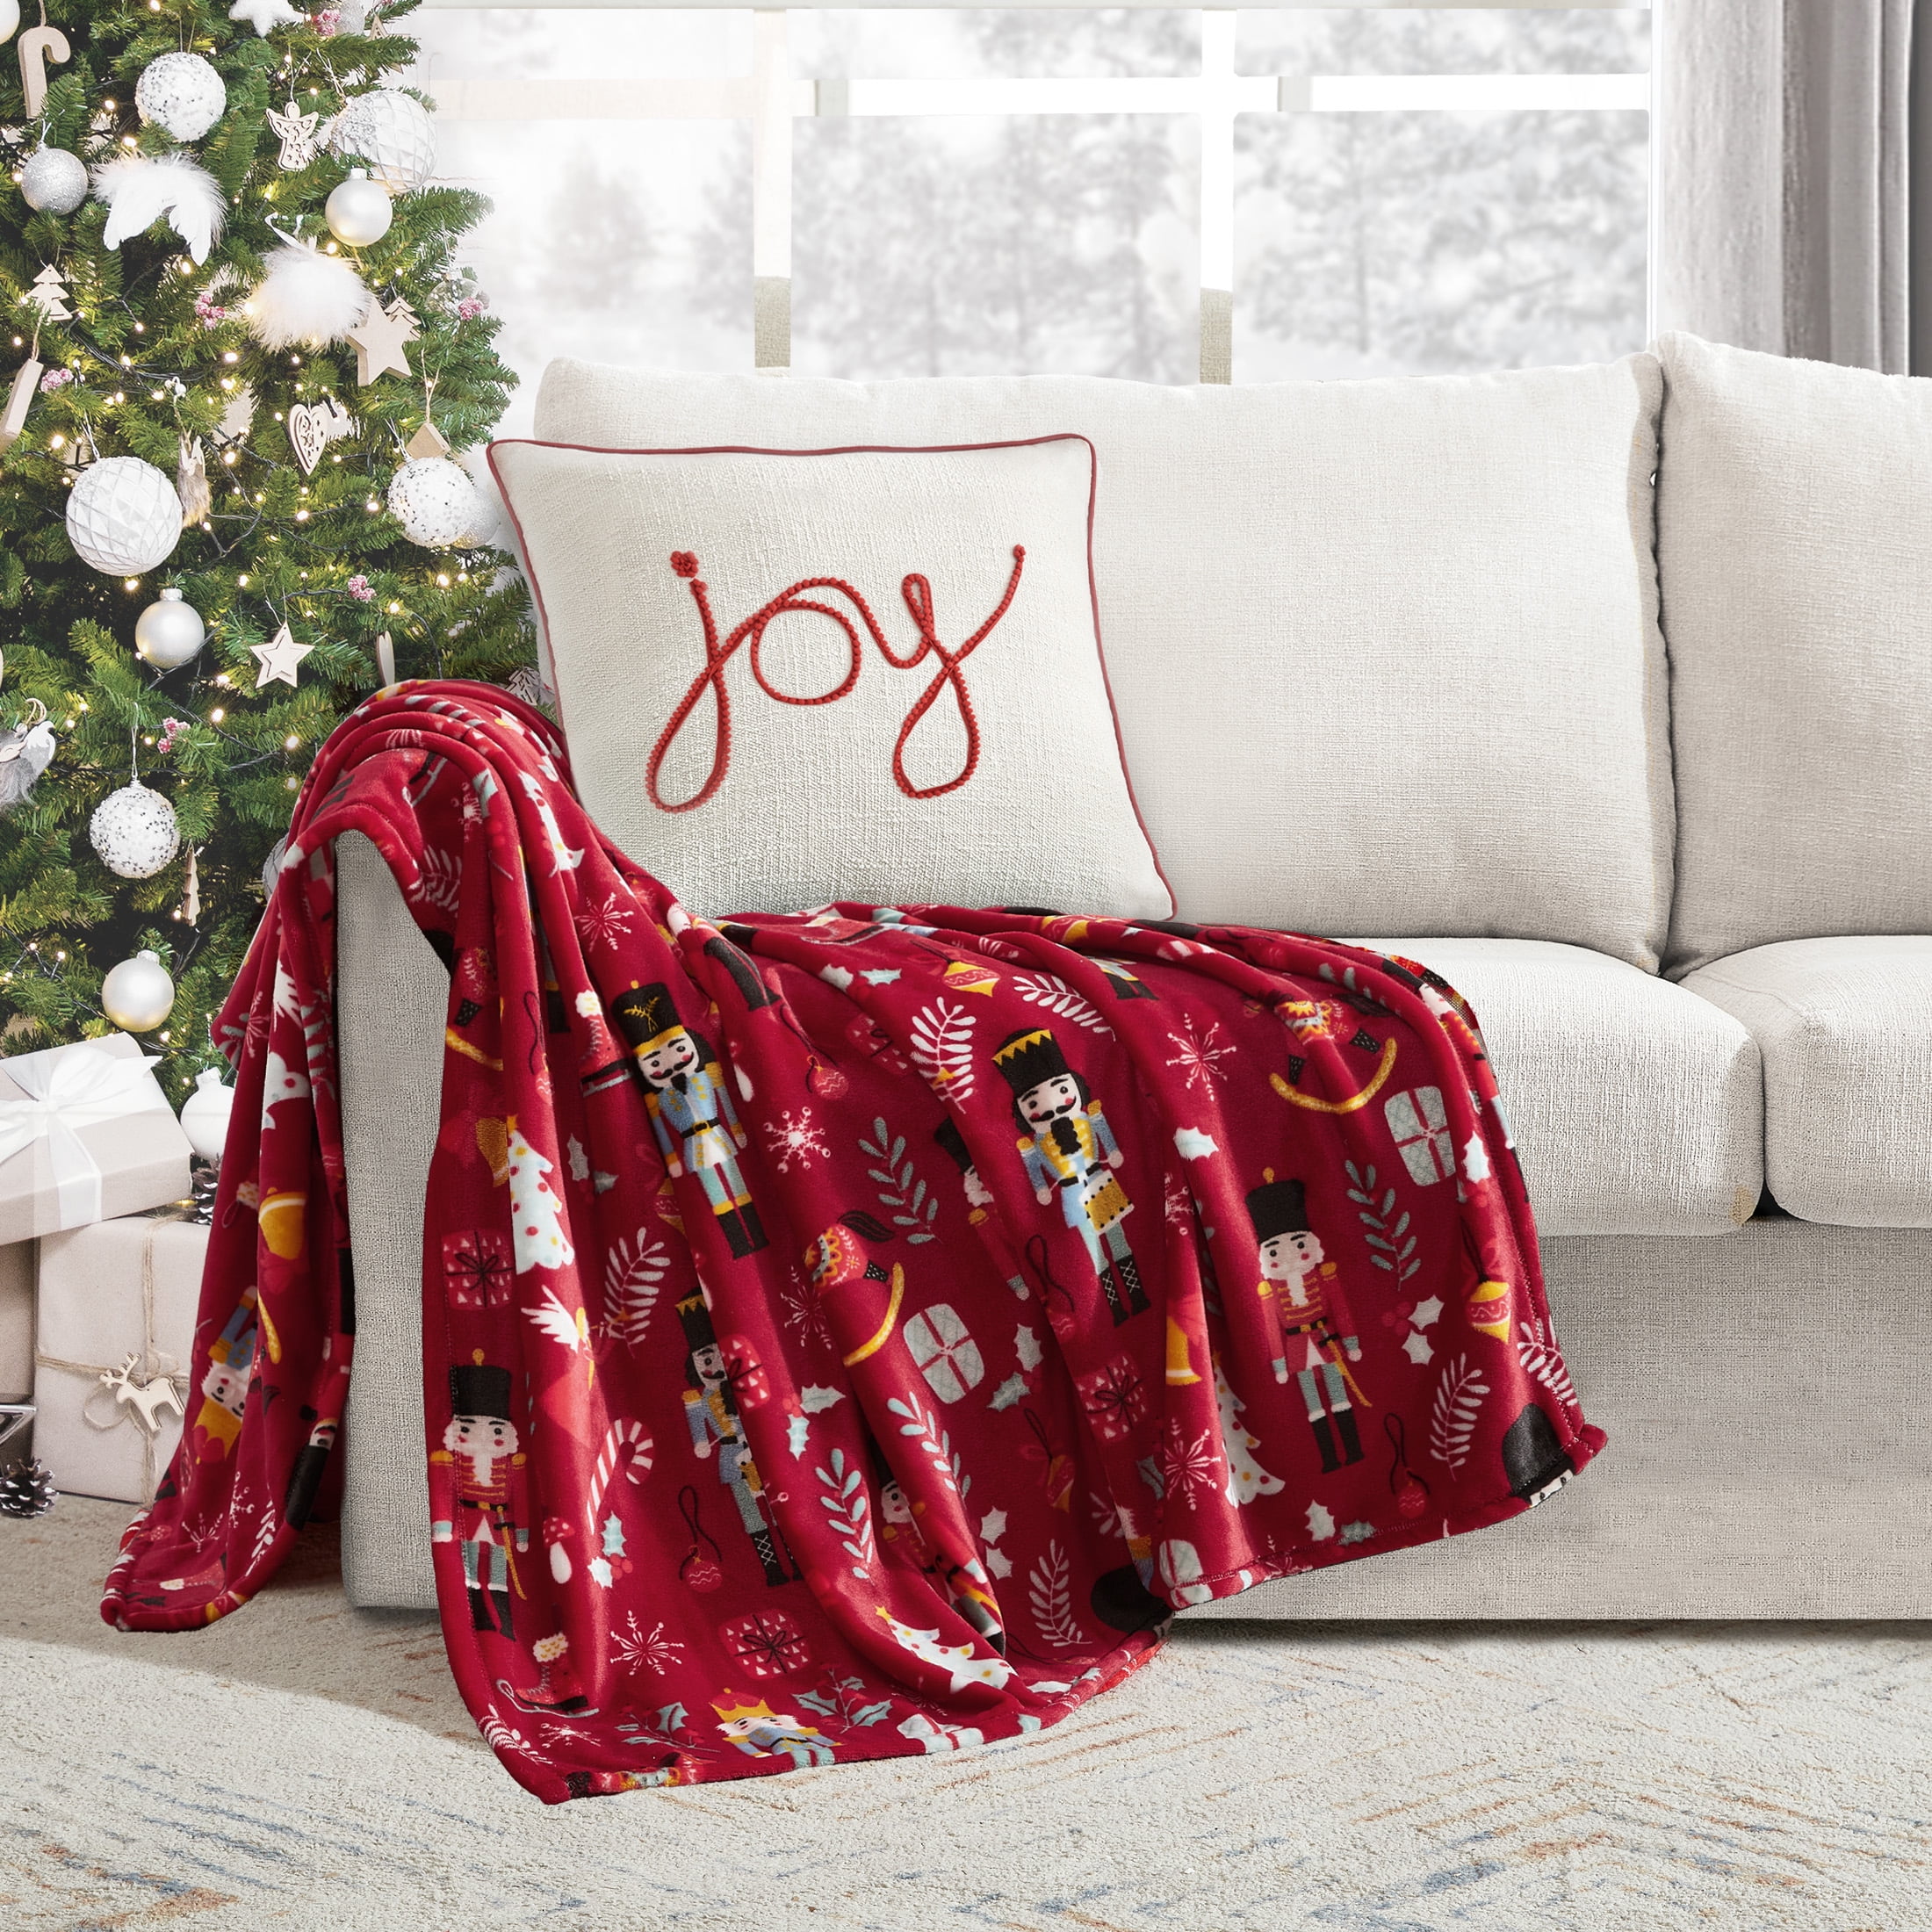 Holiday Time, Nutcracker Holiday Throw Blanket, Red, 50" x 60", 1 Pack